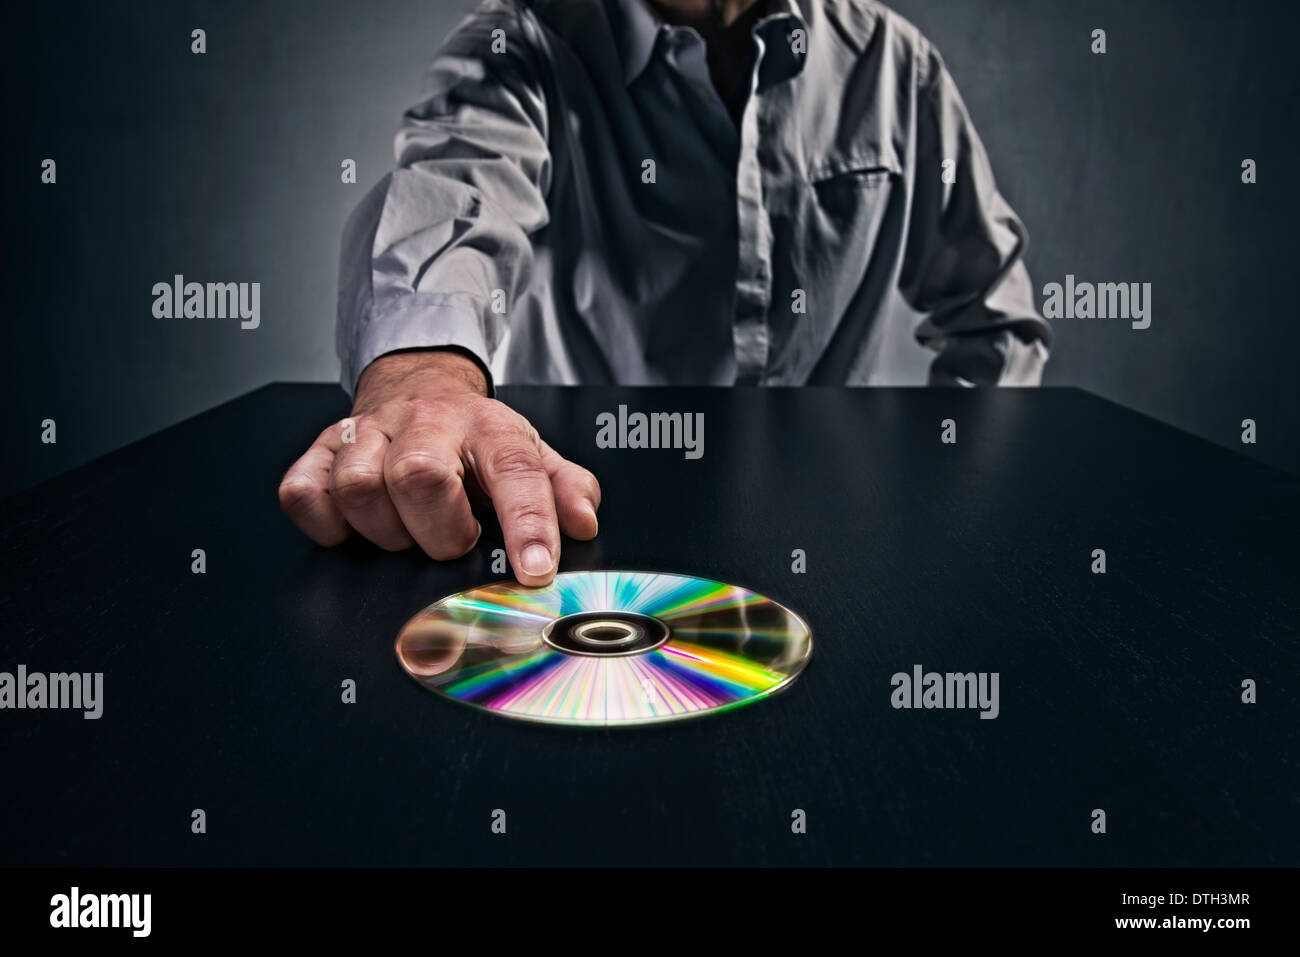 Man pushes a CD with data over a table, symbolizing the passing of secret data. Stock Photo